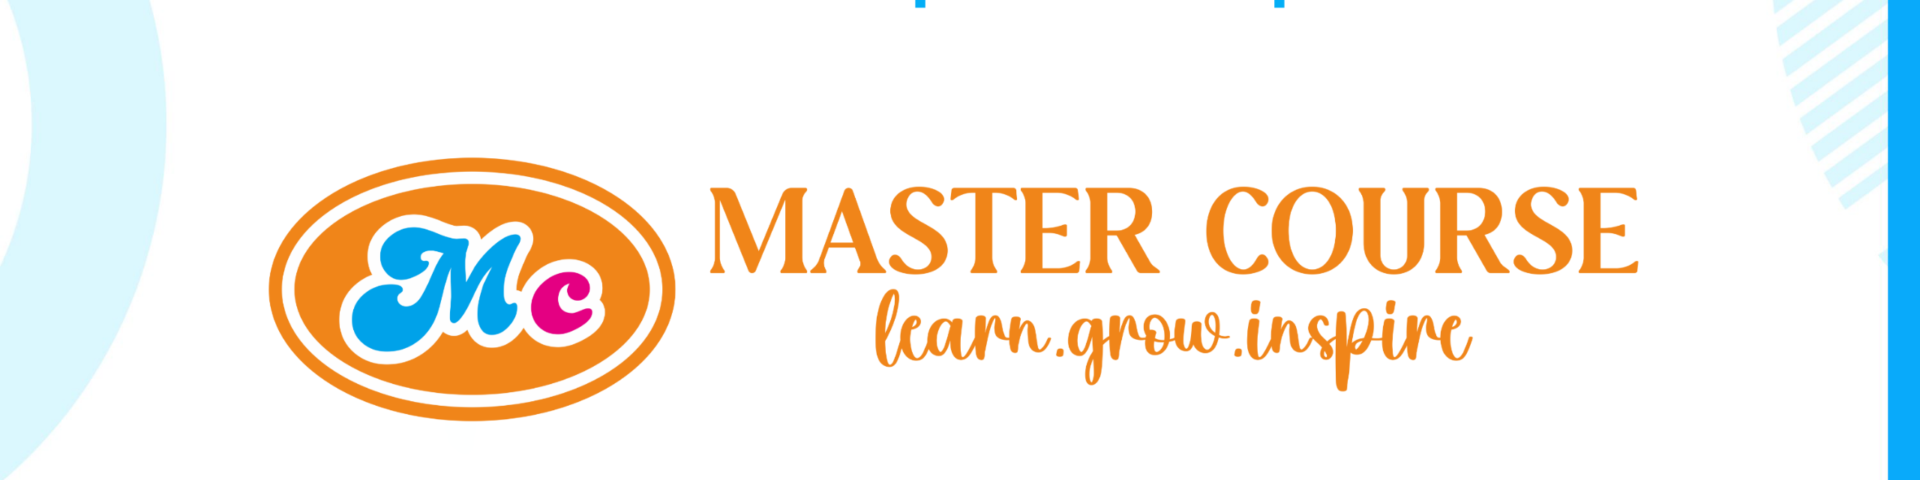 smartjen's partnership with master course indonesia